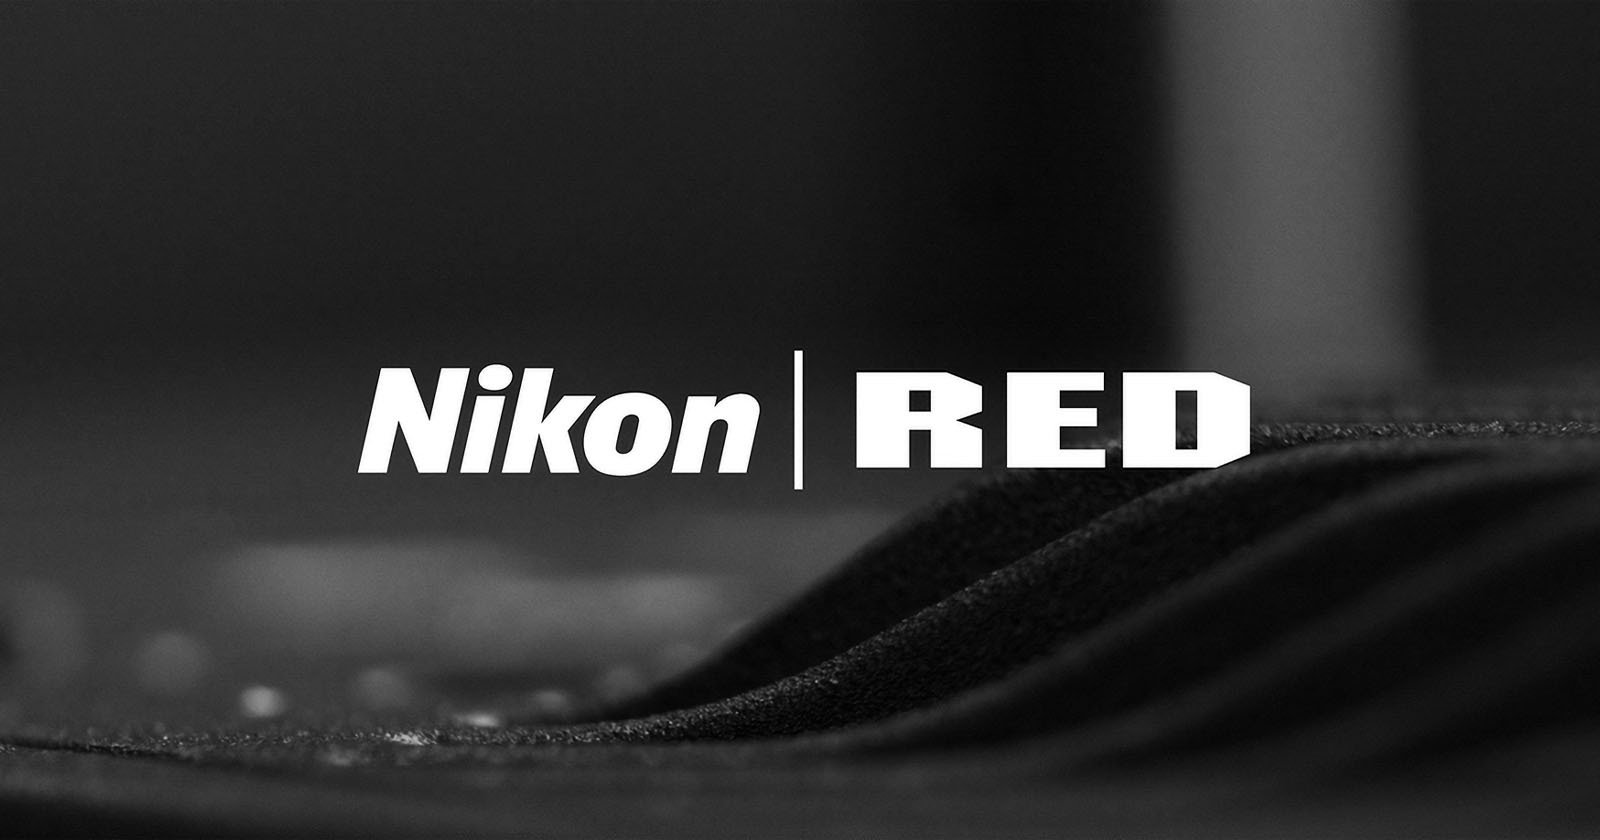 A Seismic Shift: The Ramifications of Nikons RED Acquisition